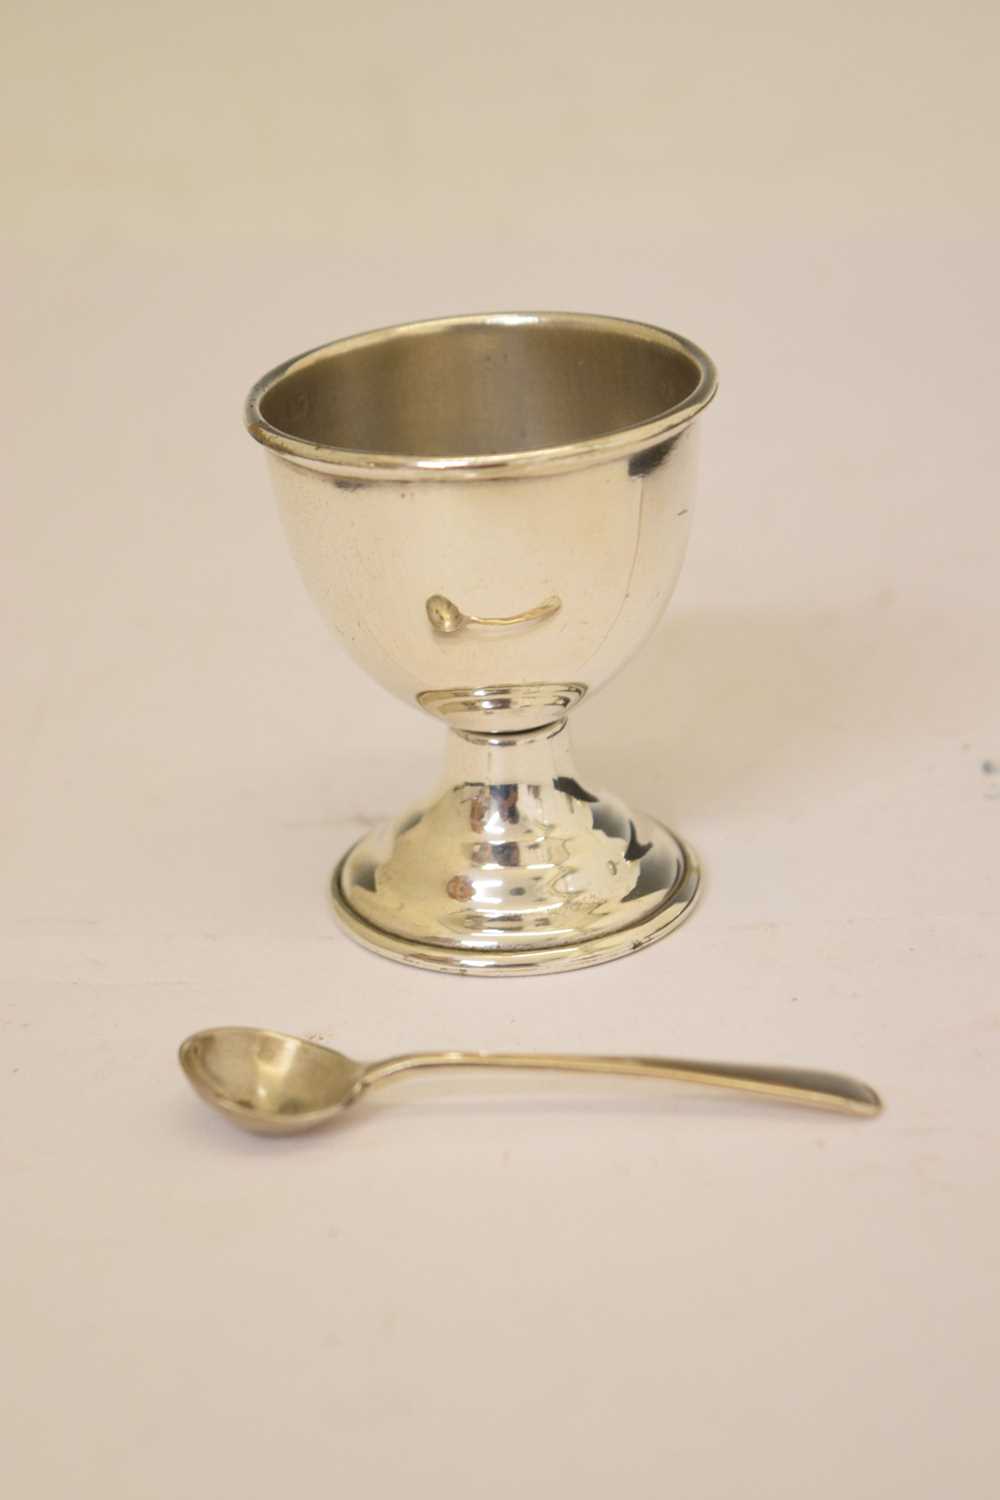 Victorian silver sugar caster with repousse decoration, Christening sets, etc - Image 6 of 6